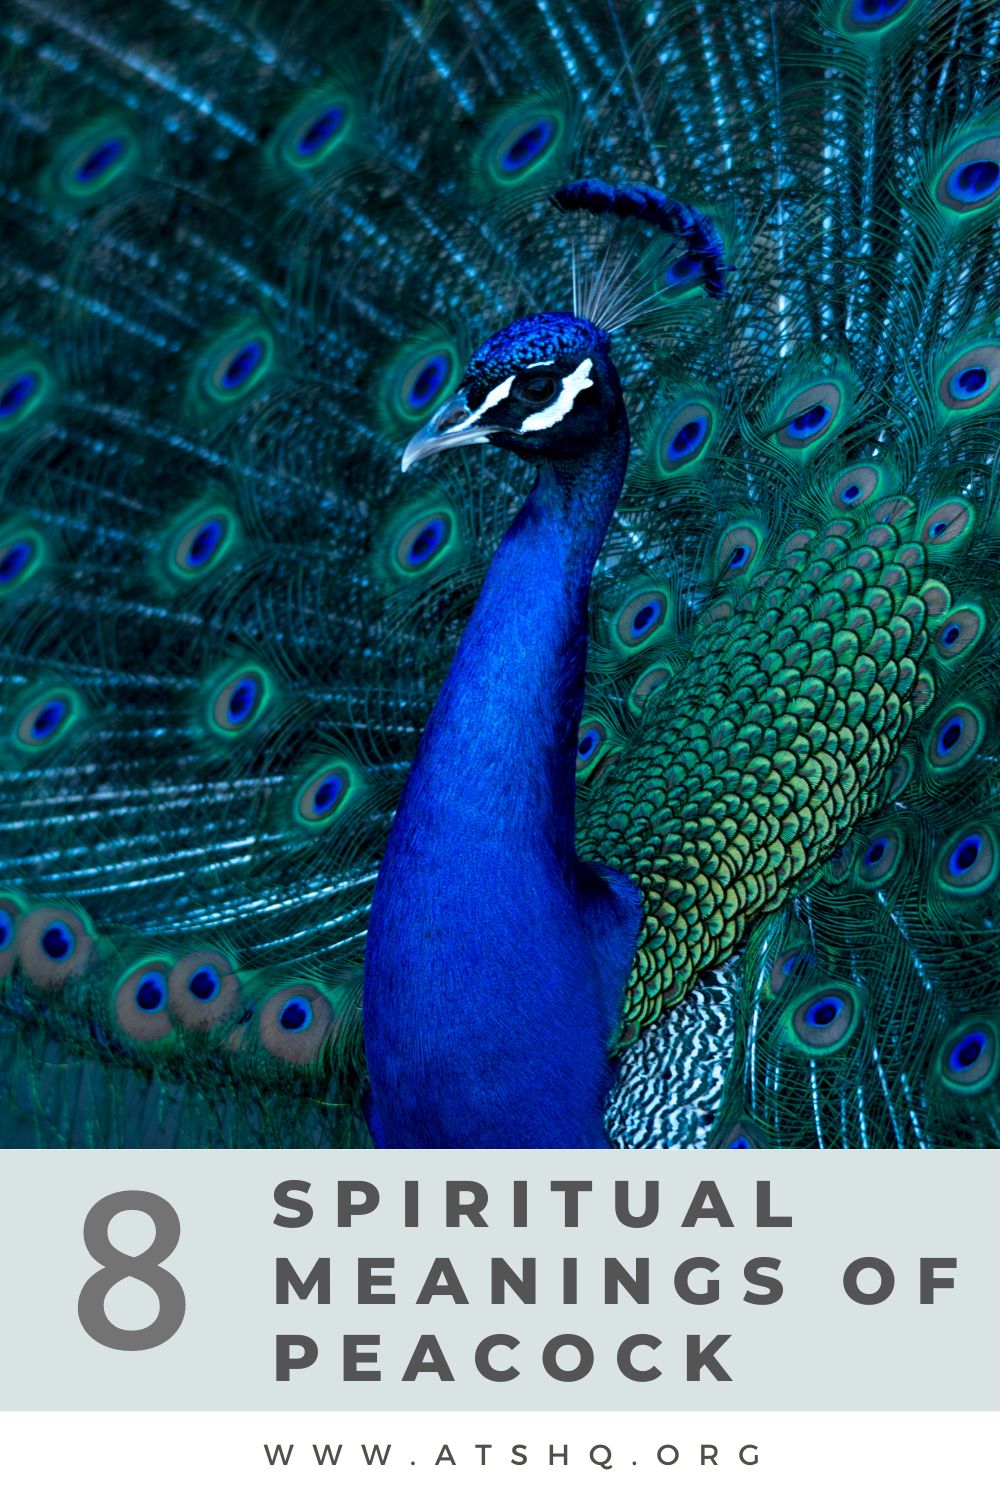 peacock symbolism meaning